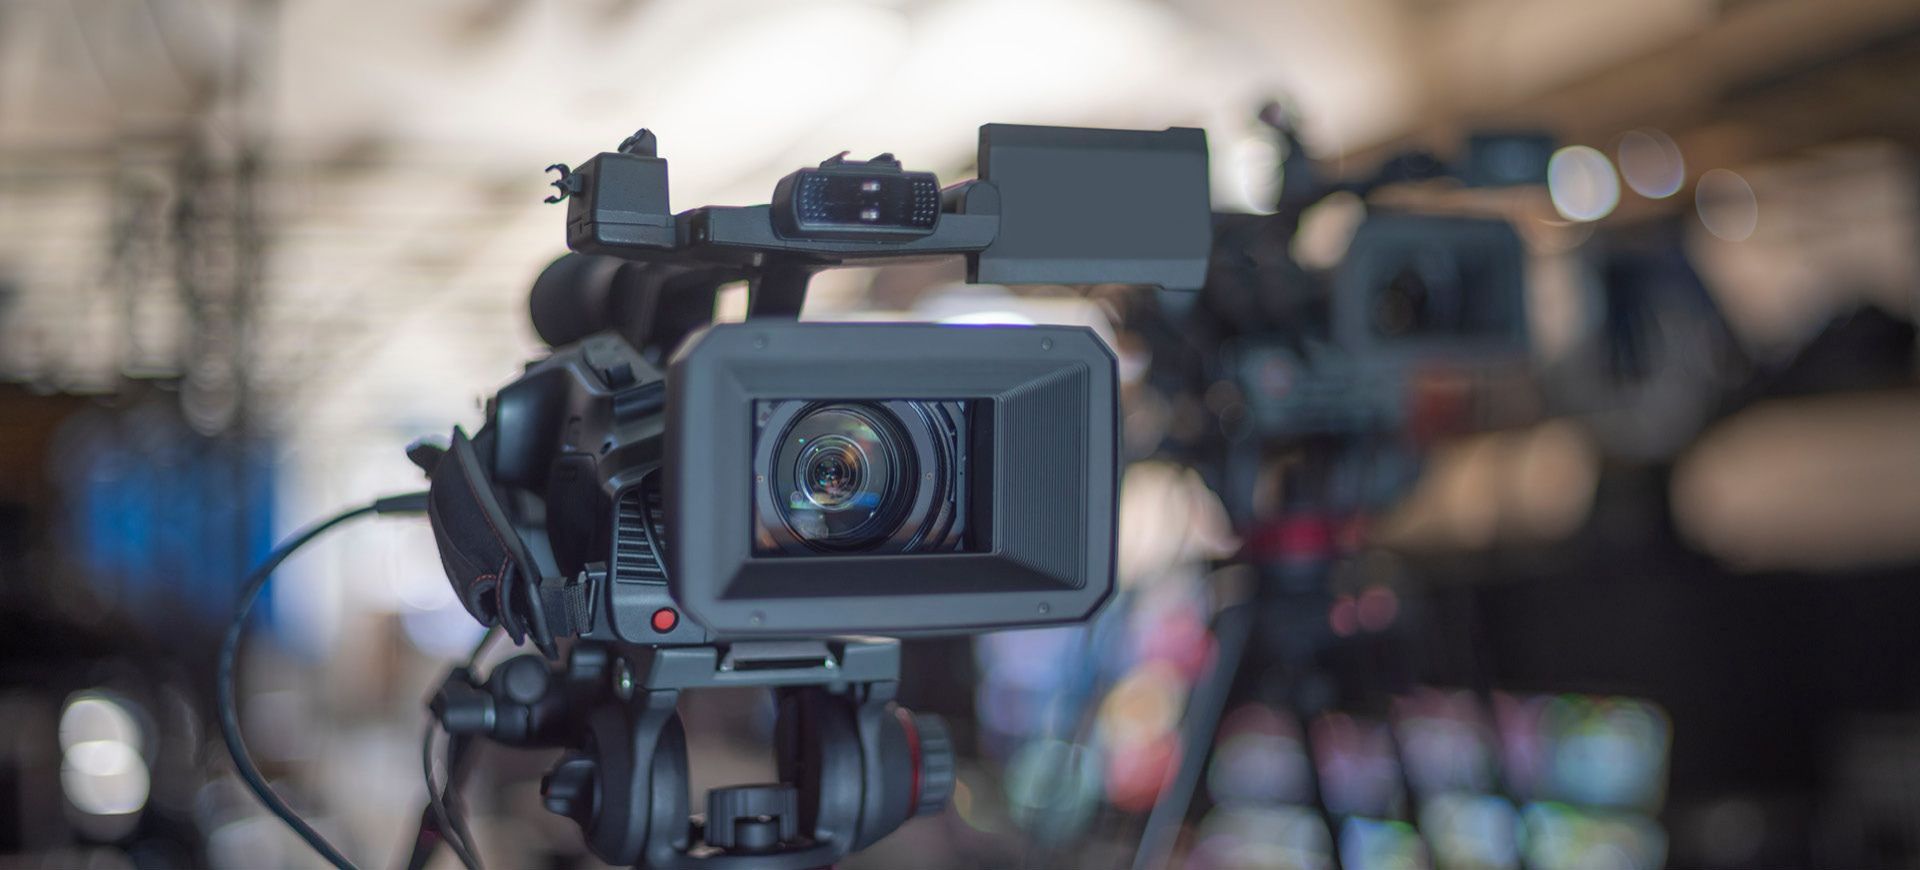 Key Considerations For Video Production